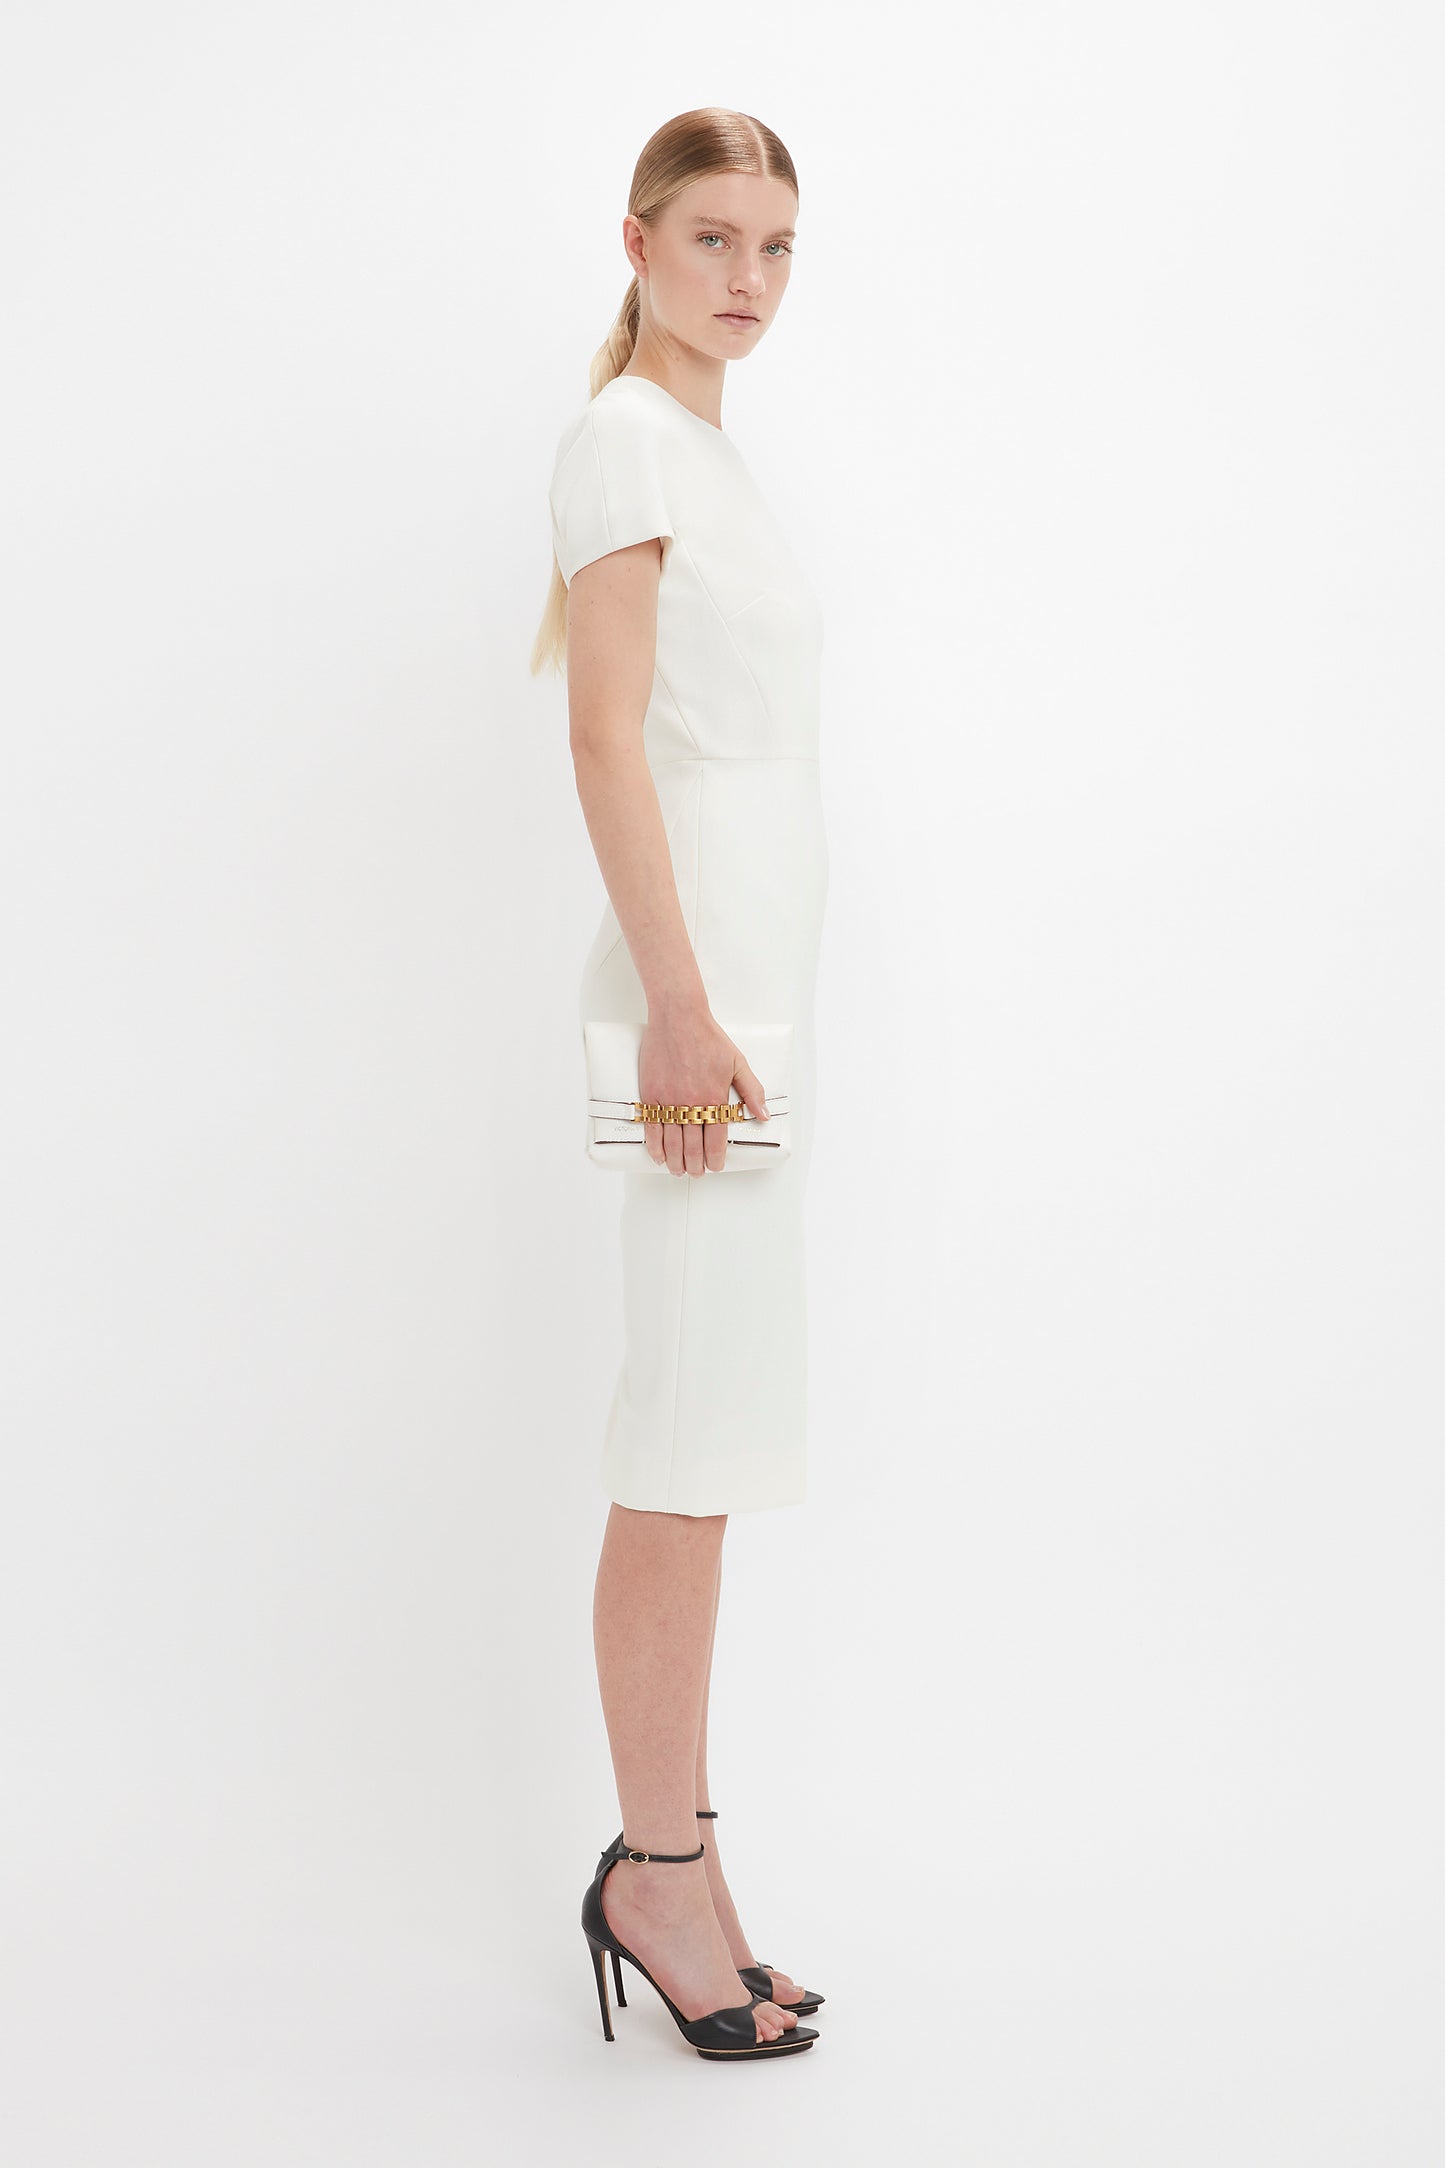 A woman in a sleek white Victoria Beckham fitted T-shirt dress and black pointy-toe stiletto sandals, holding a white mini chain pouch, posing against a plain white background.